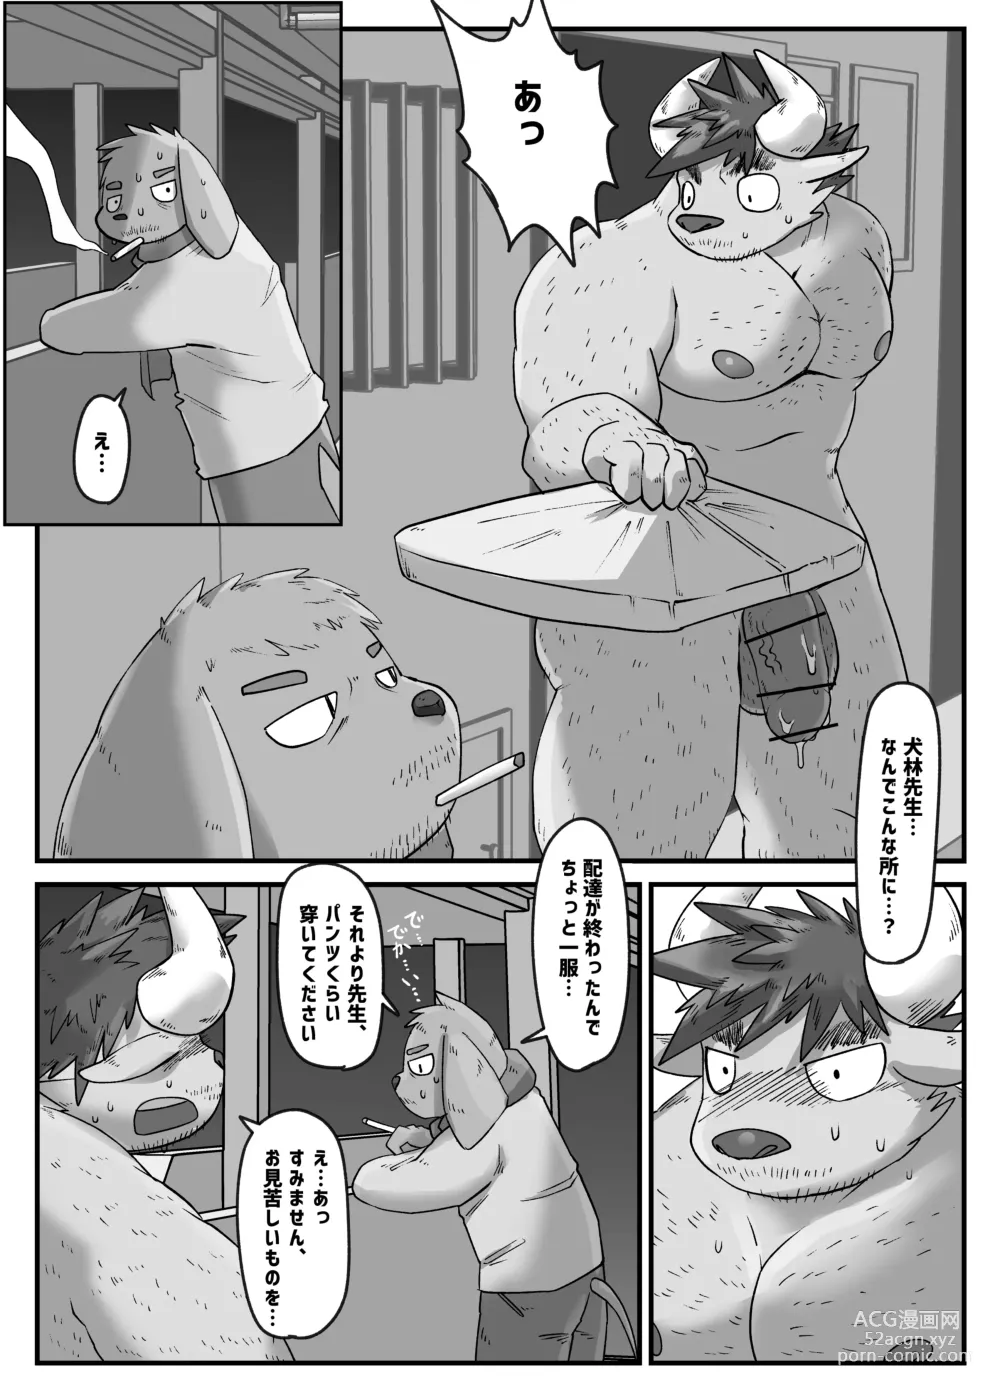 Page 14 of doujinshi Muscular Bull Teacher & Chubby Tiger Student 5